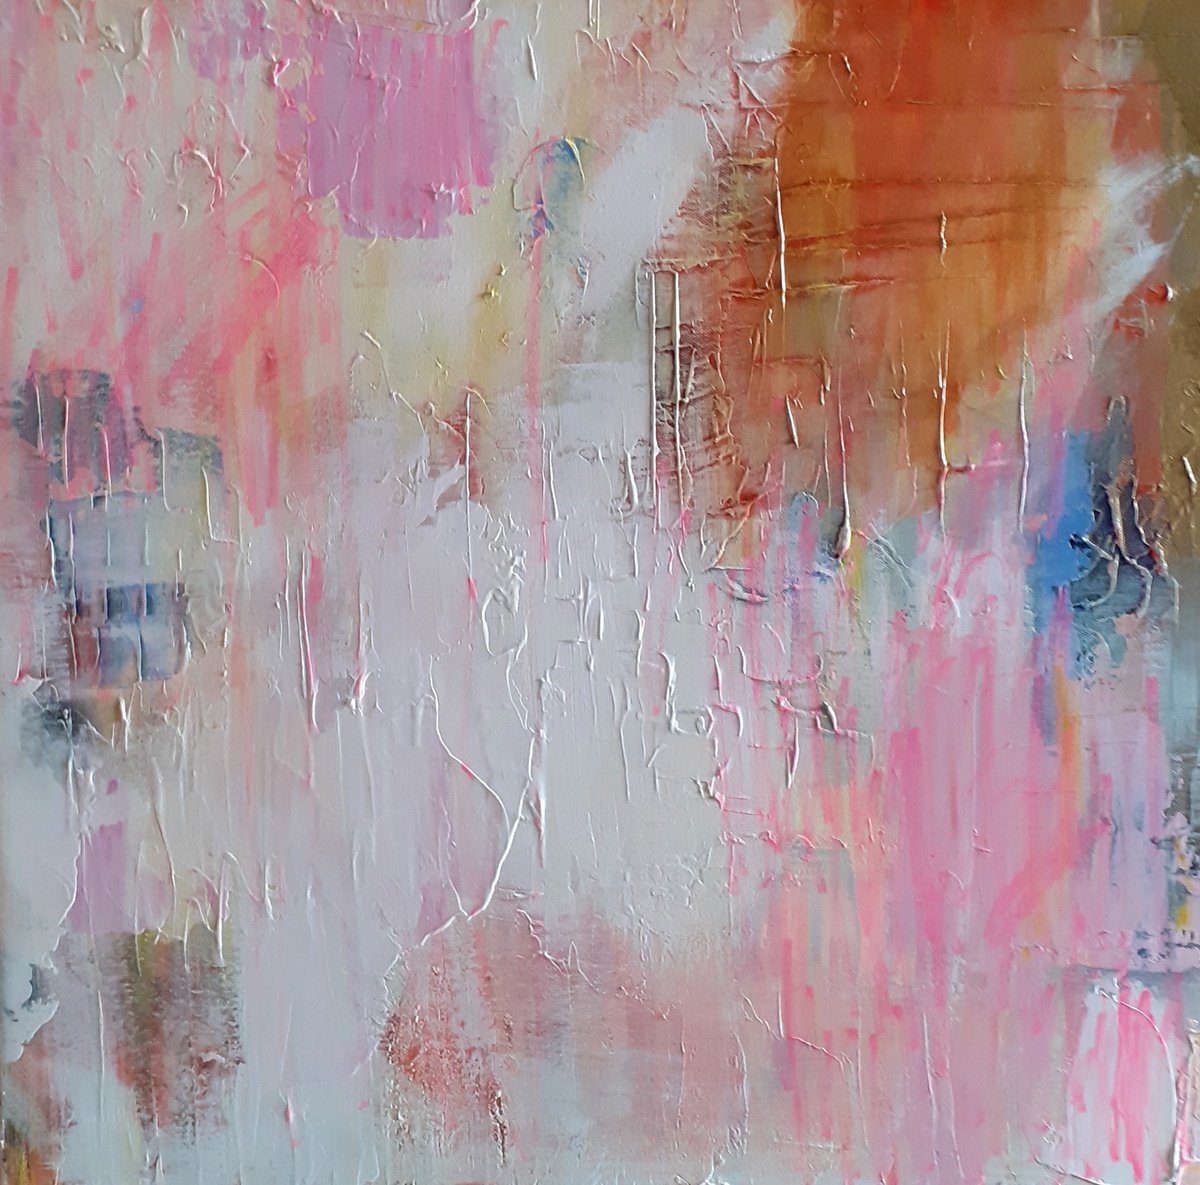 Abstract painting Voyage Interieur II by Celine Marcoz